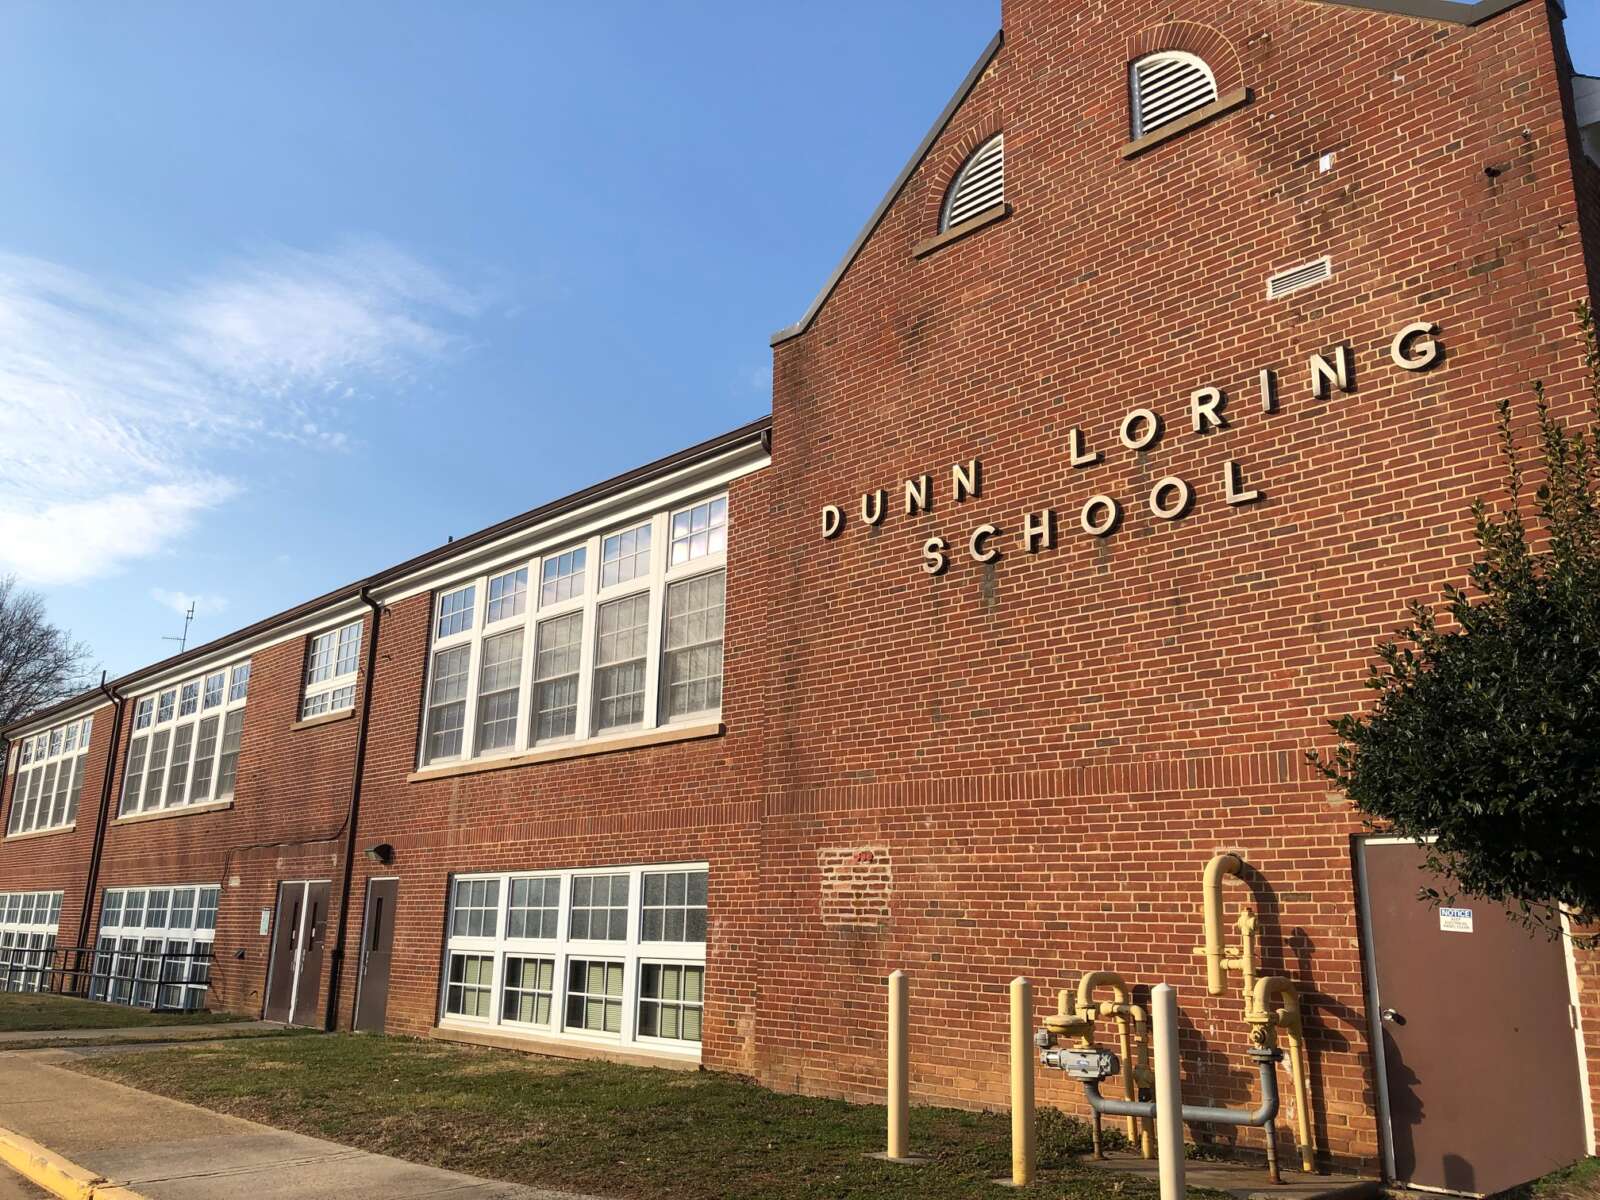 Proposed design of new Dunn Loring Elementary School to be unveiled